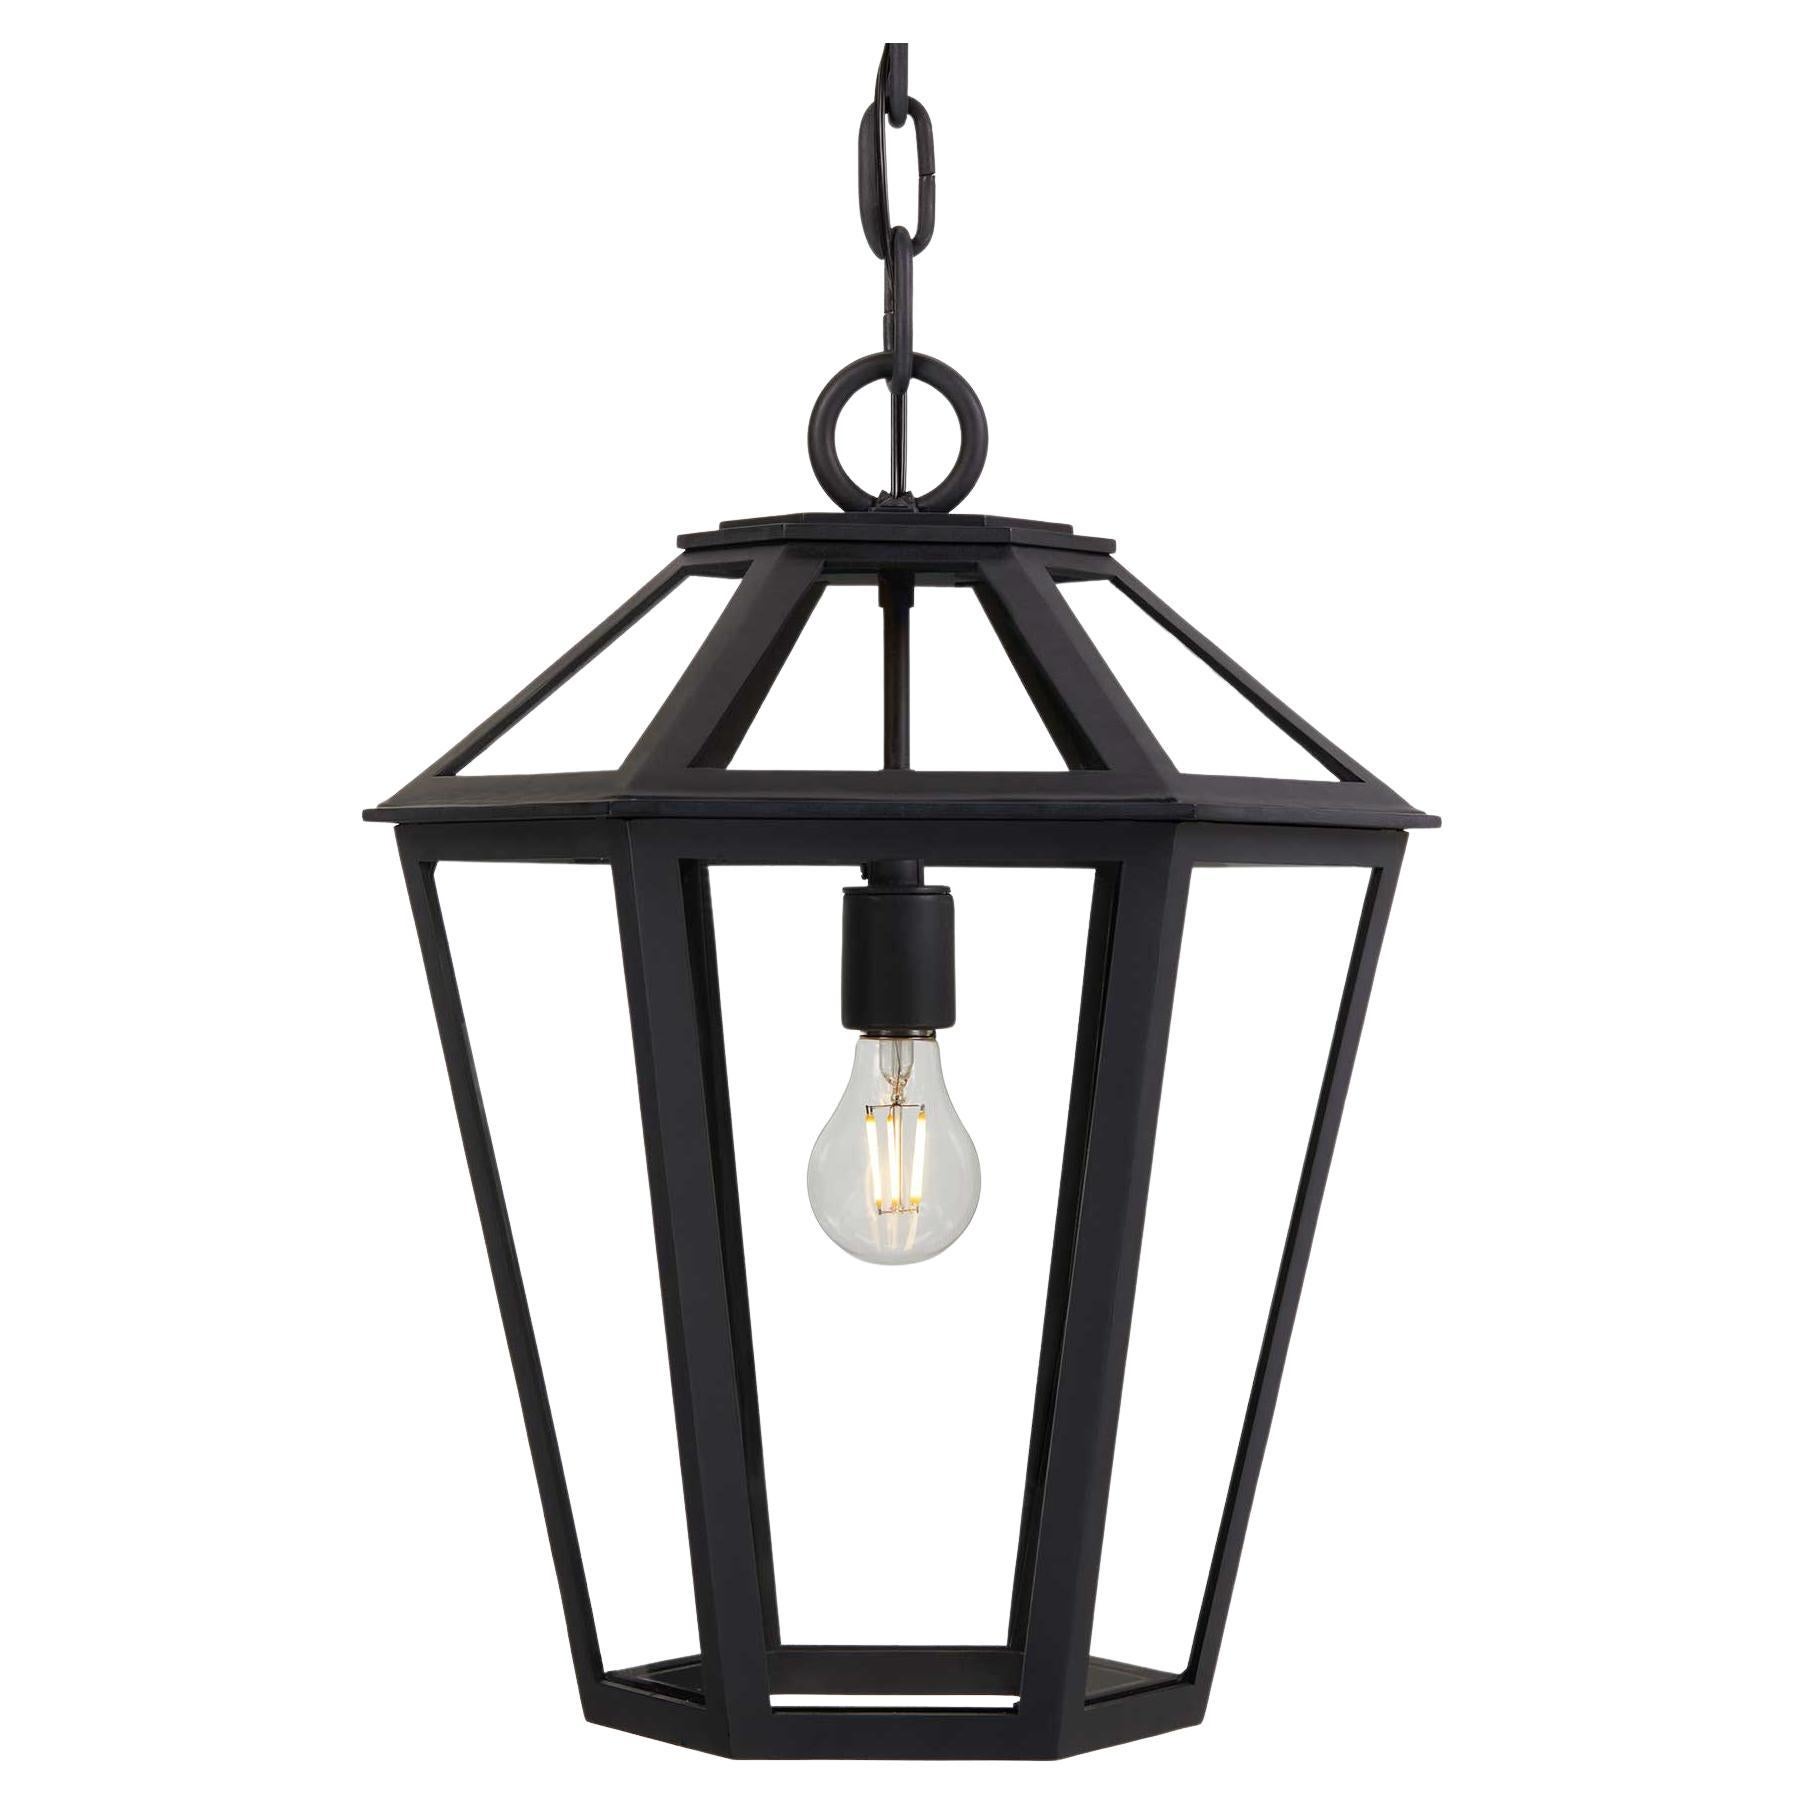 Mediterranean Hand-forged Wrought Iron Pendant Exterior, Interior Light Fixture For Sale